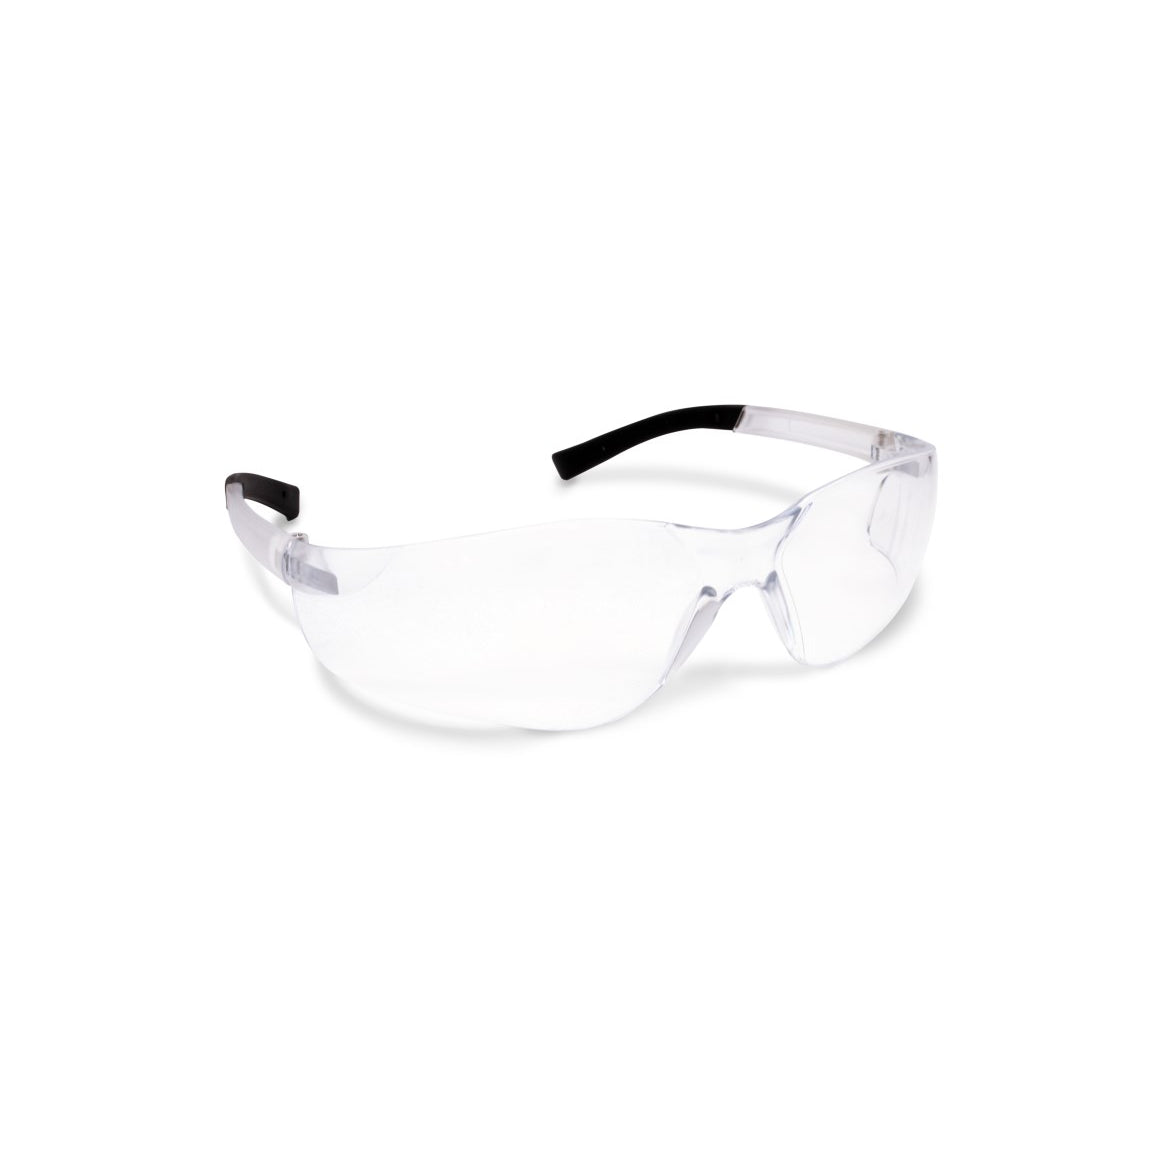 Workhorse® Anti-Fog Safety Glasses, Clear Lens